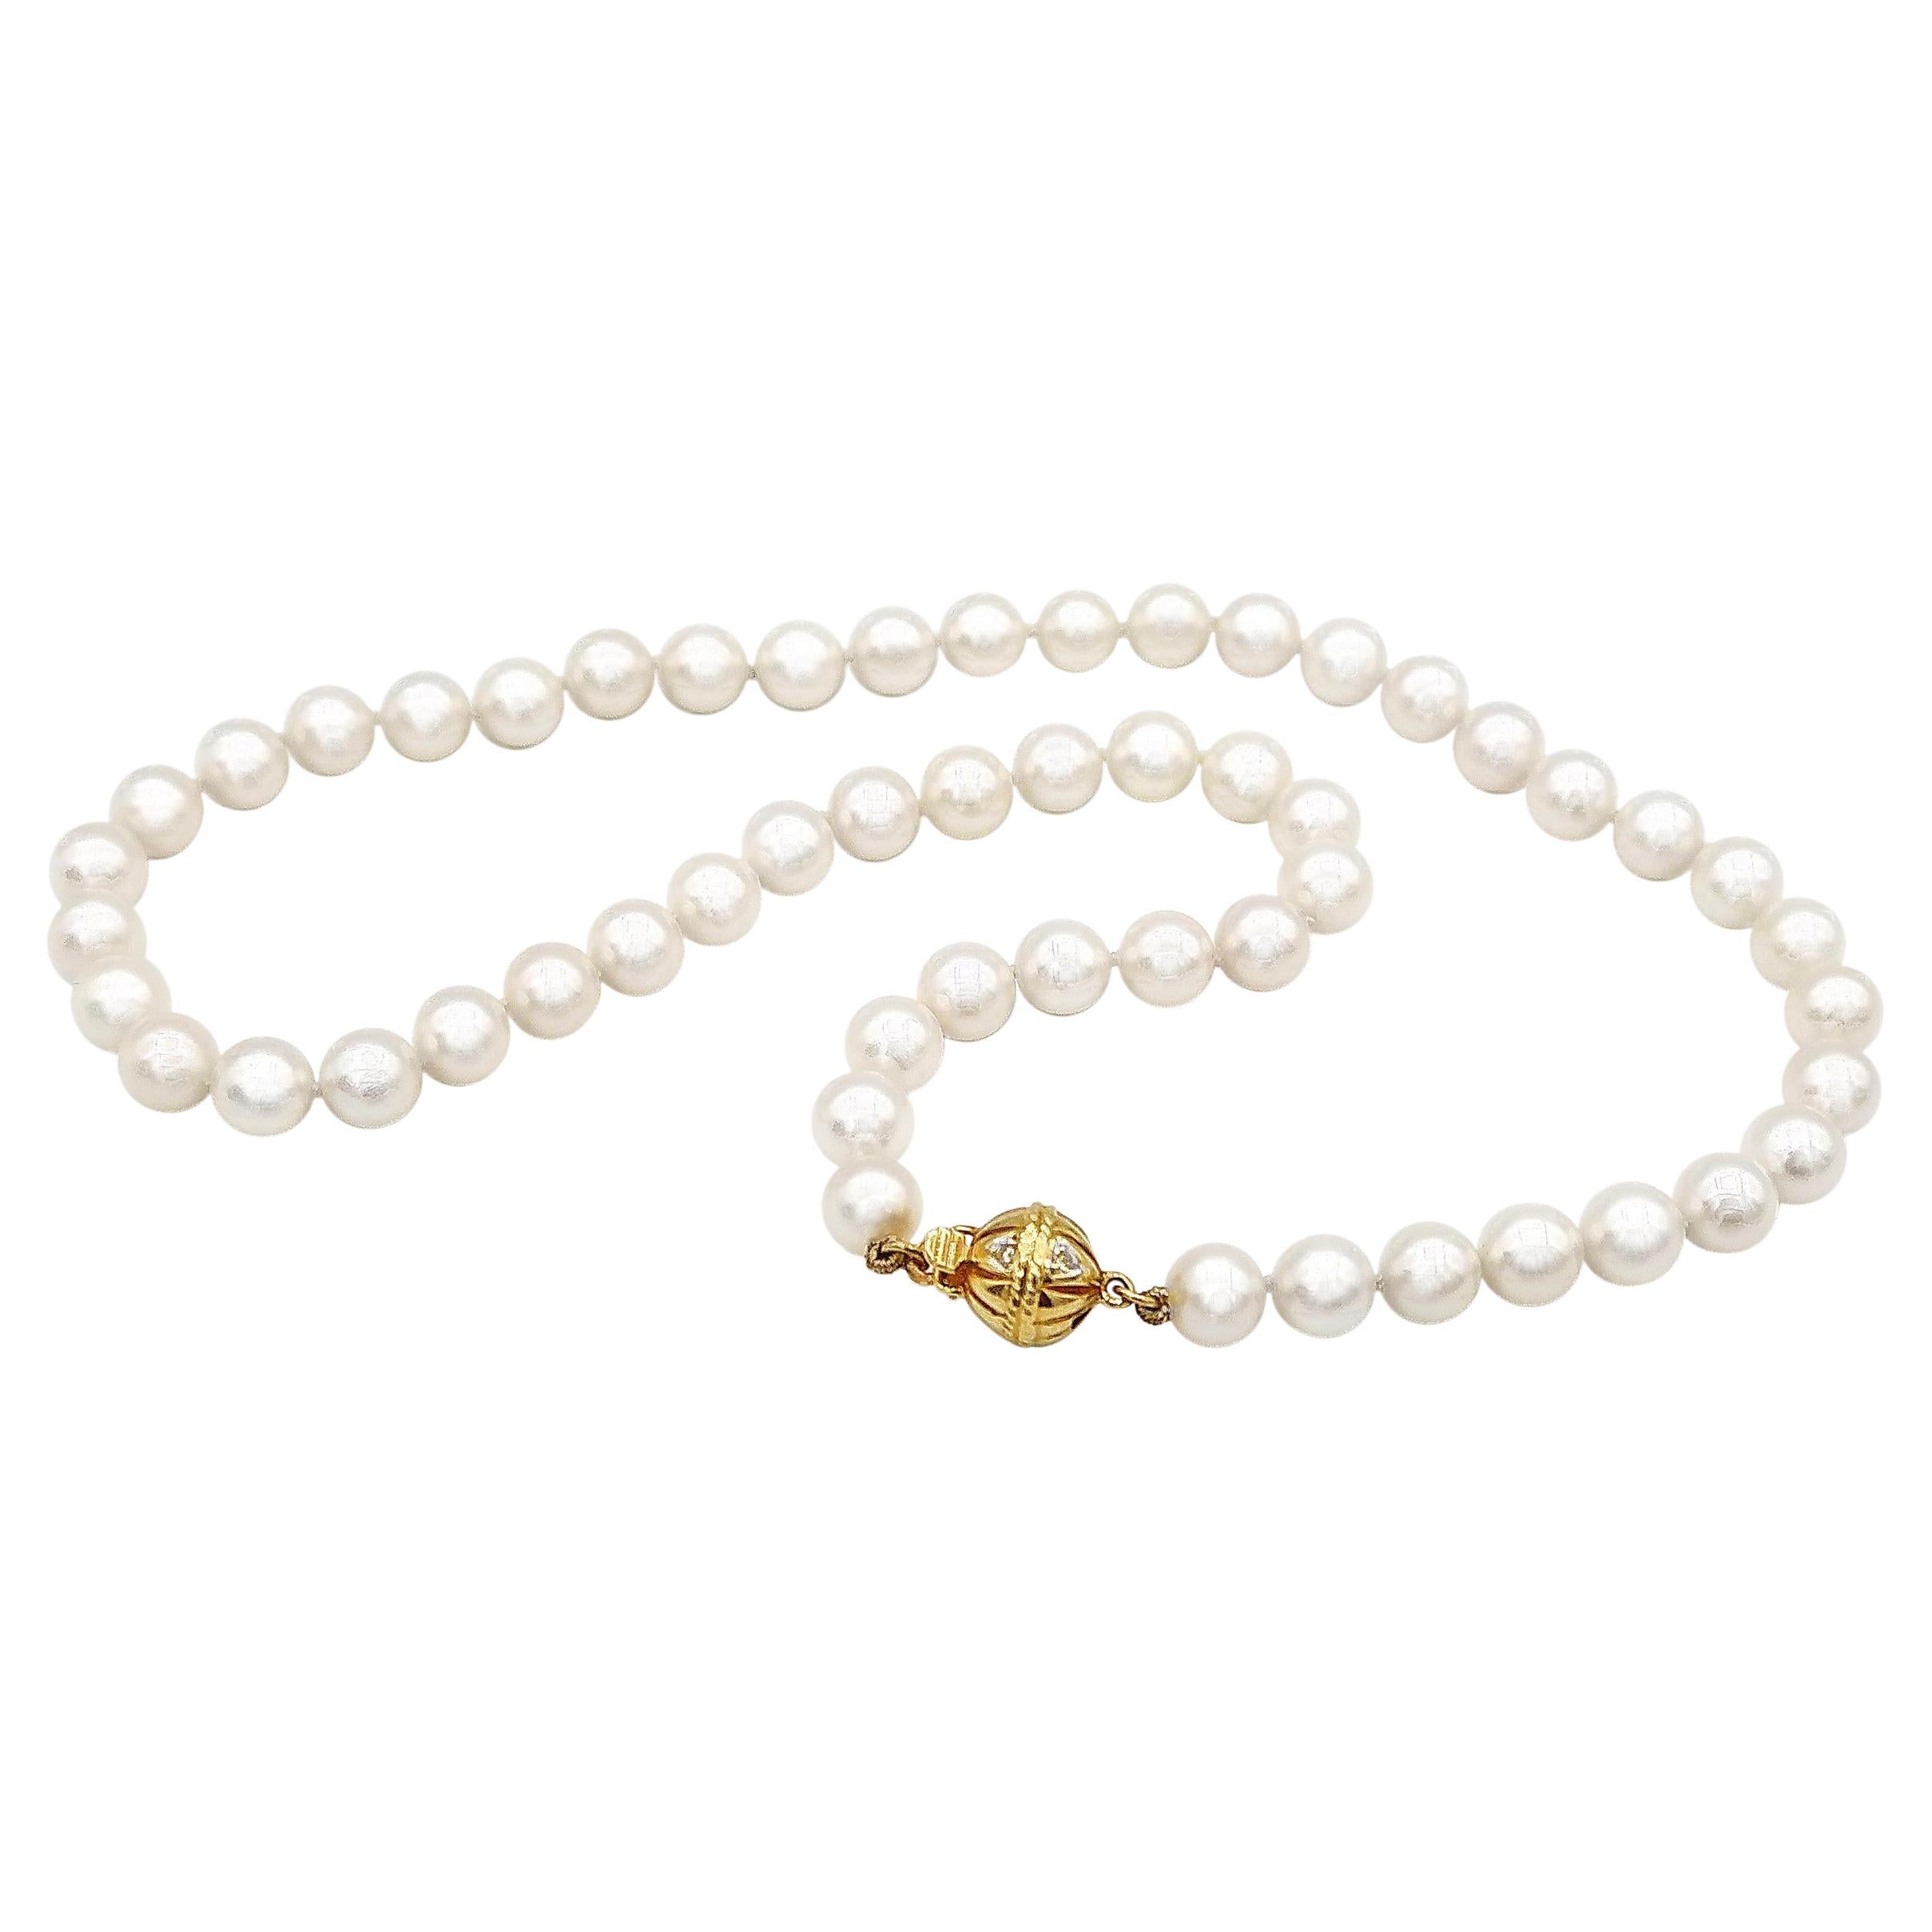 Japanese Cultured Akoya Pearl Necklace w/ Diamond 18k Yellow Gold Clasp For Sale